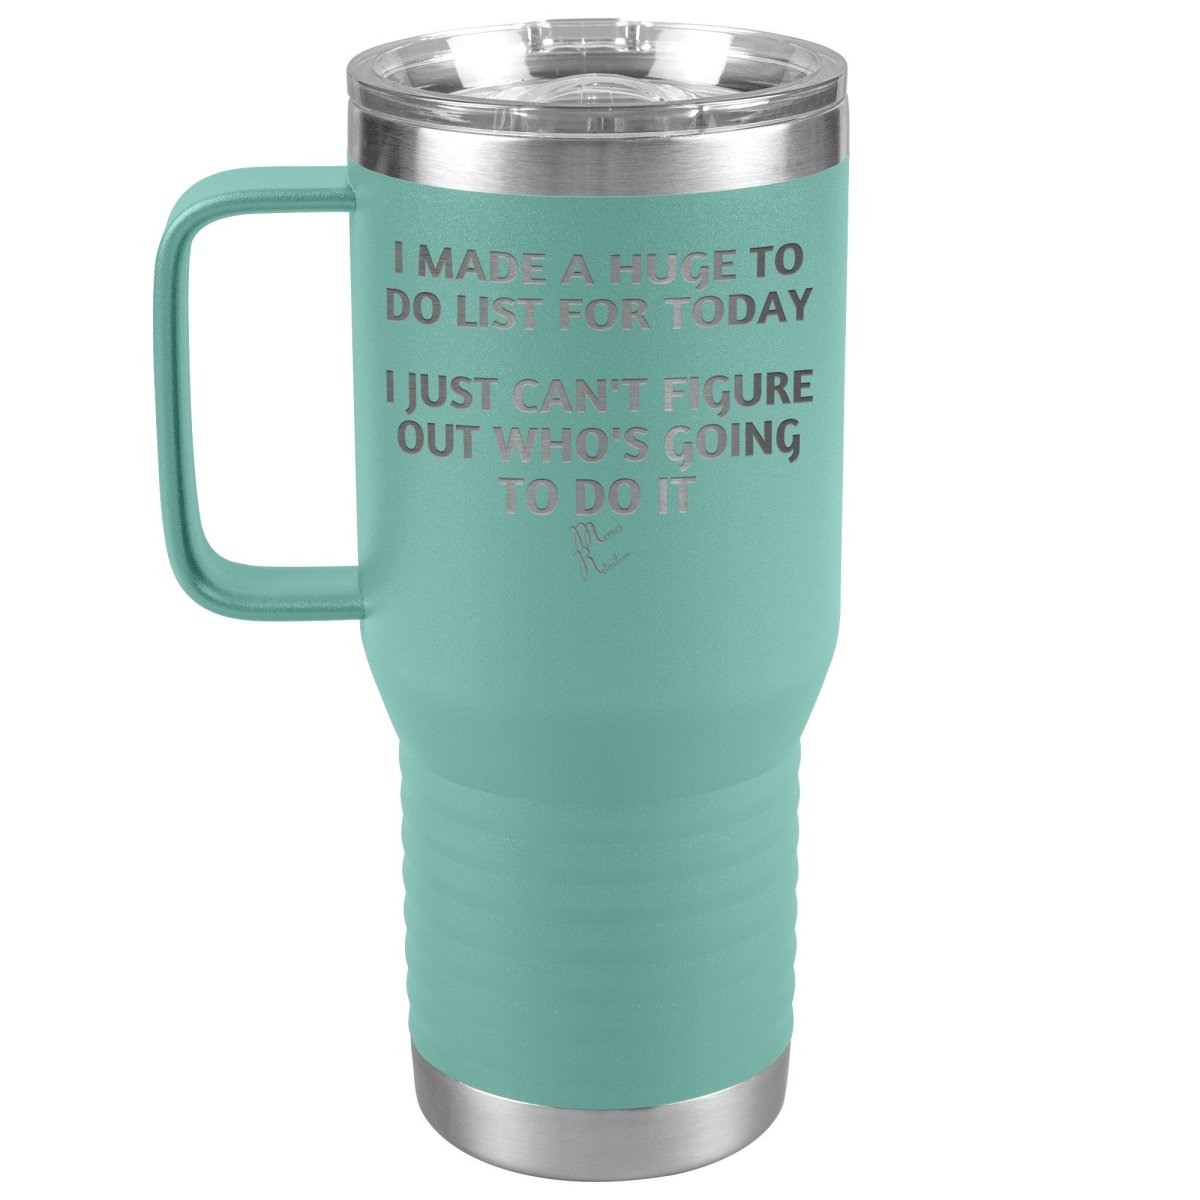 I made a huge to do list for today. I just can't figure out who's going to do it Tumblers, 20oz Travel Tumbler / Teal - MemesRetail.com